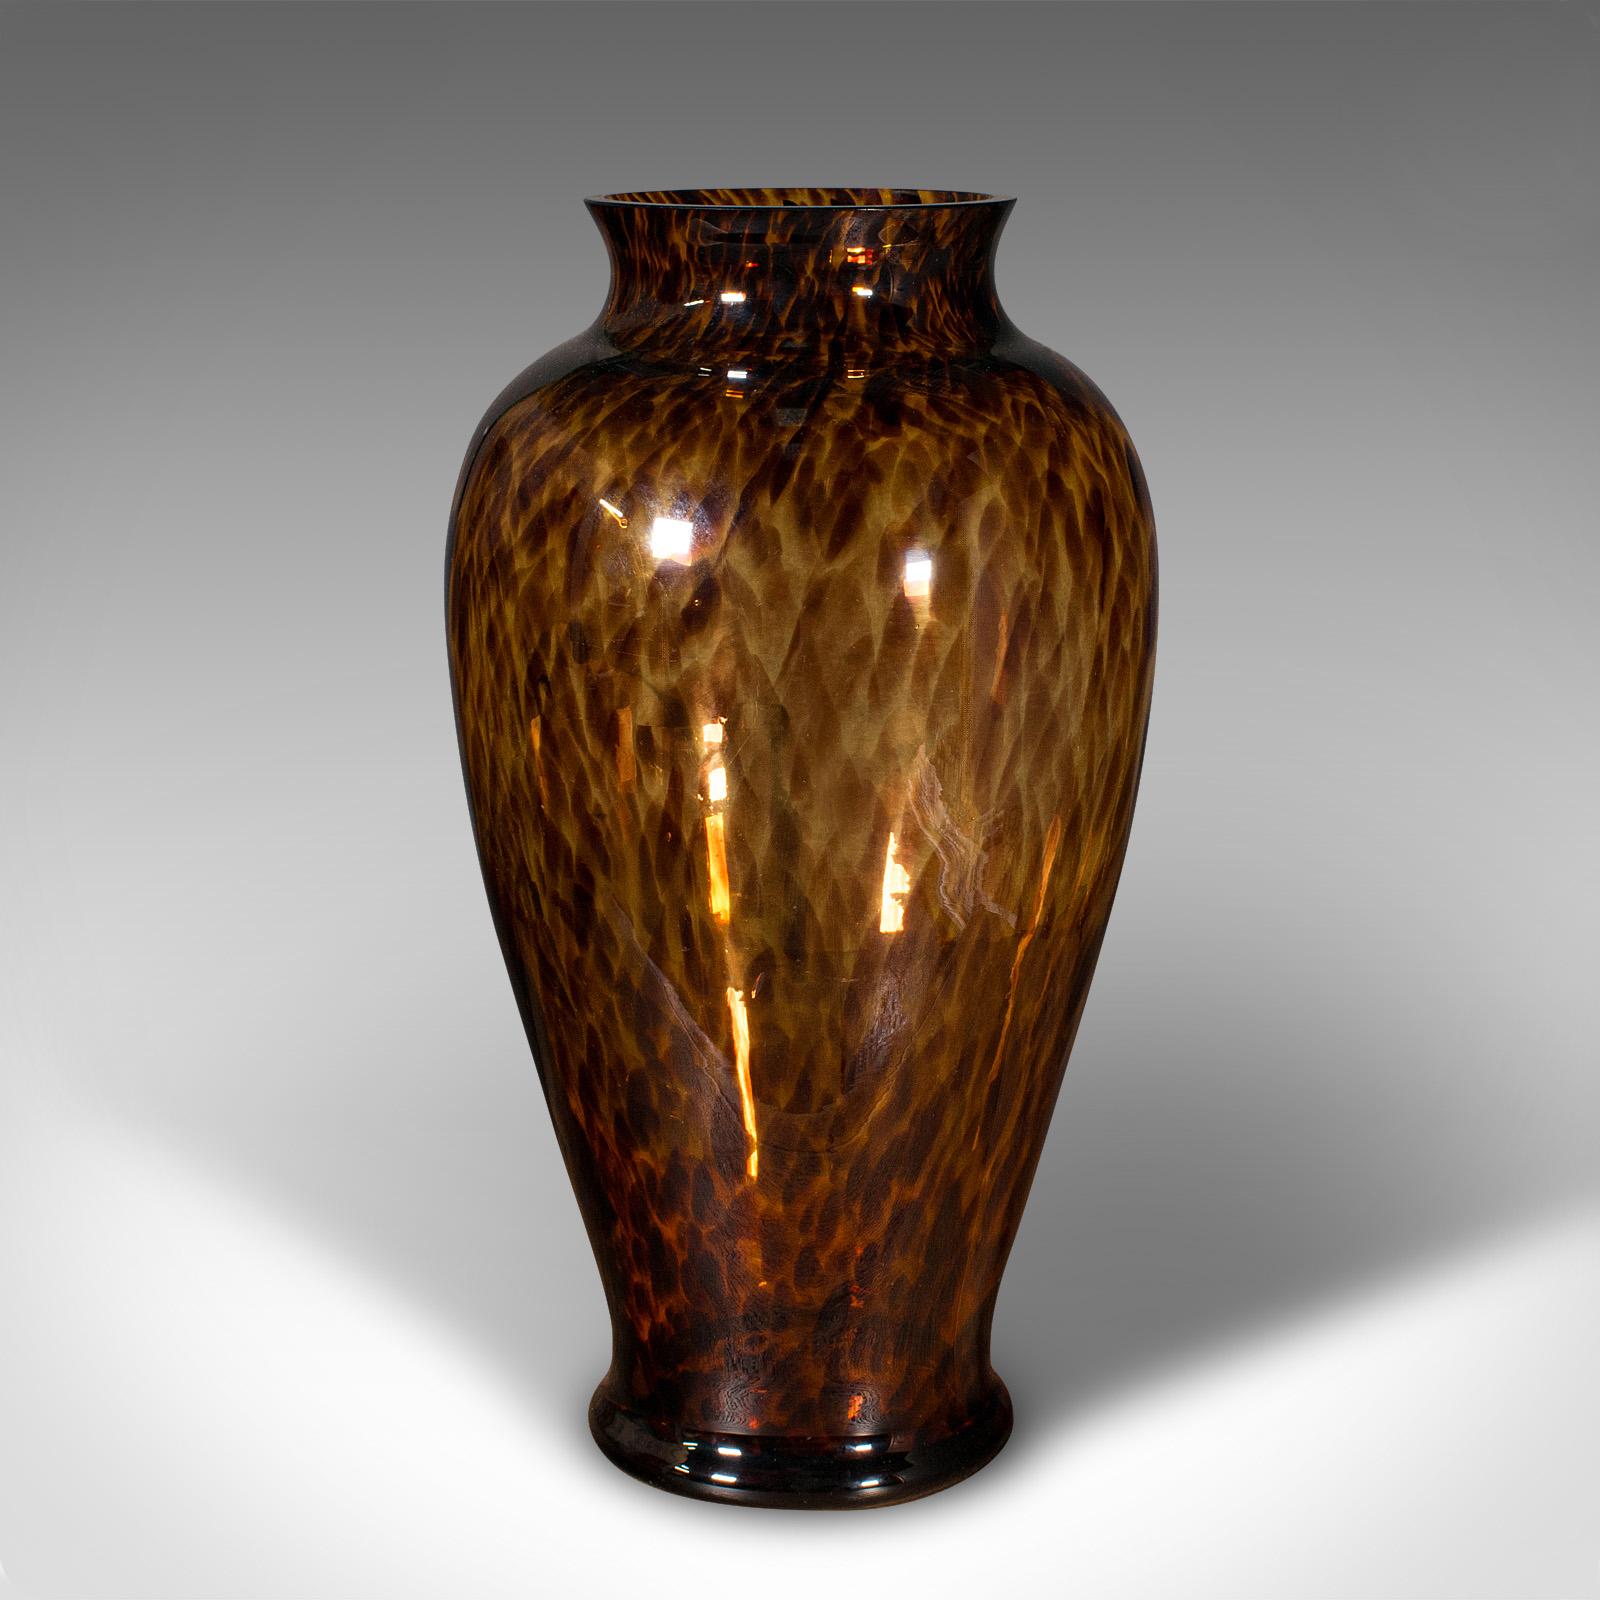 This is a large vintage amber flower vase. An Italian, art glass baluster urn with decorative pattern, dating to the late 20th century, circa 1970.

Fascinating period decor, with great colour
Displaying a desirable aged patina throughout - tiny